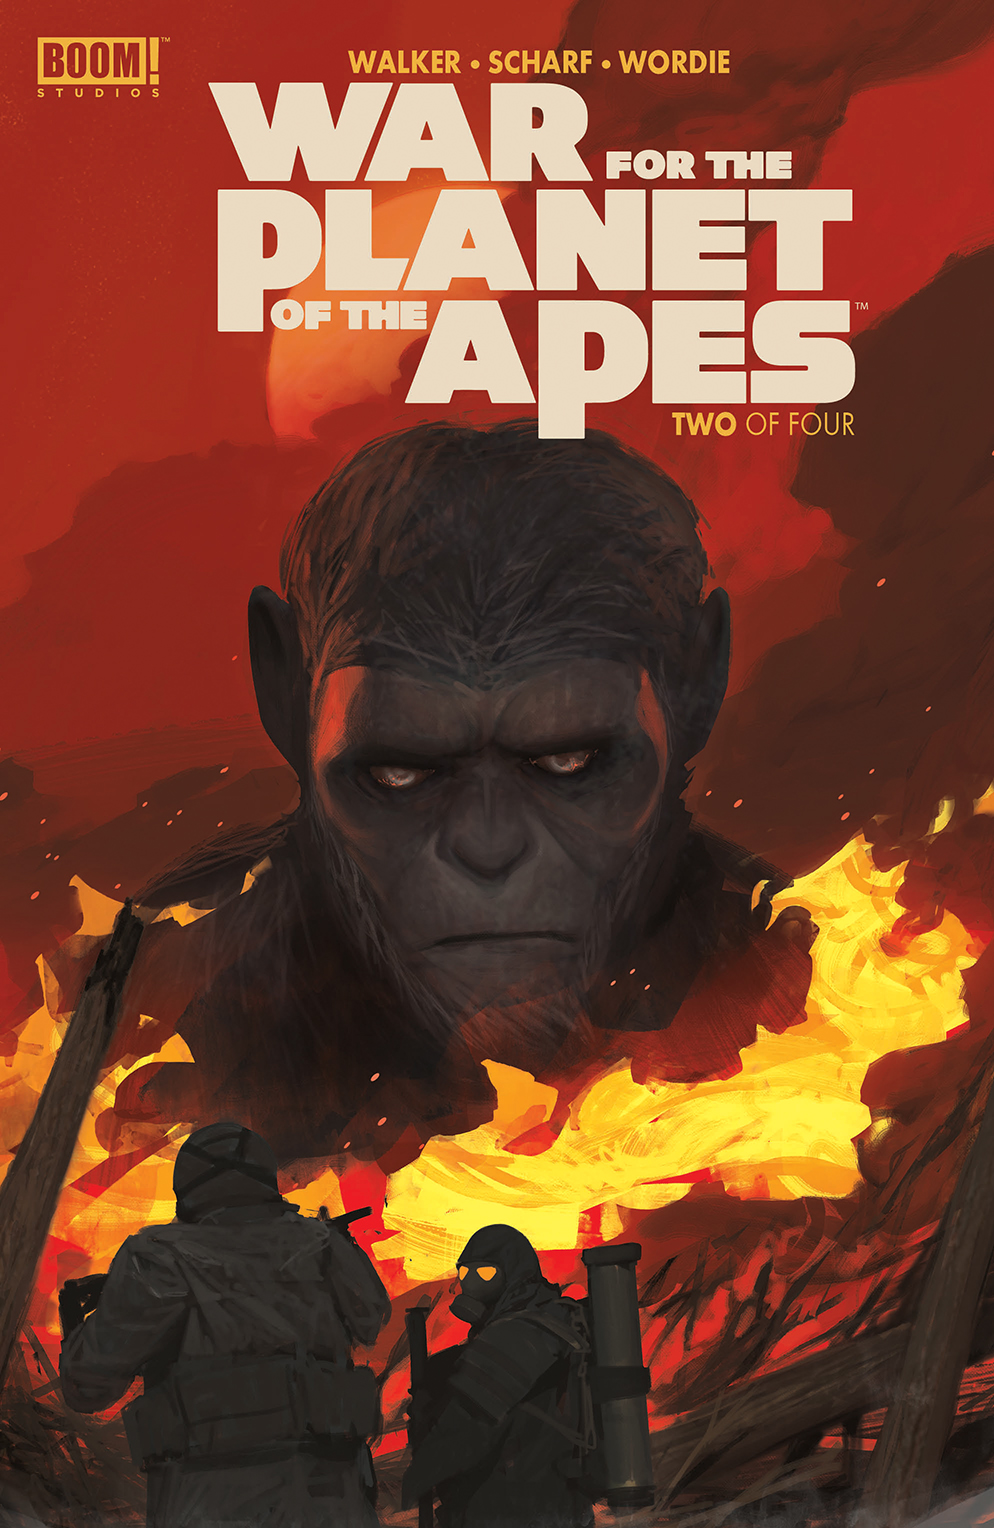 War for the Planet of the Apes #2 Review